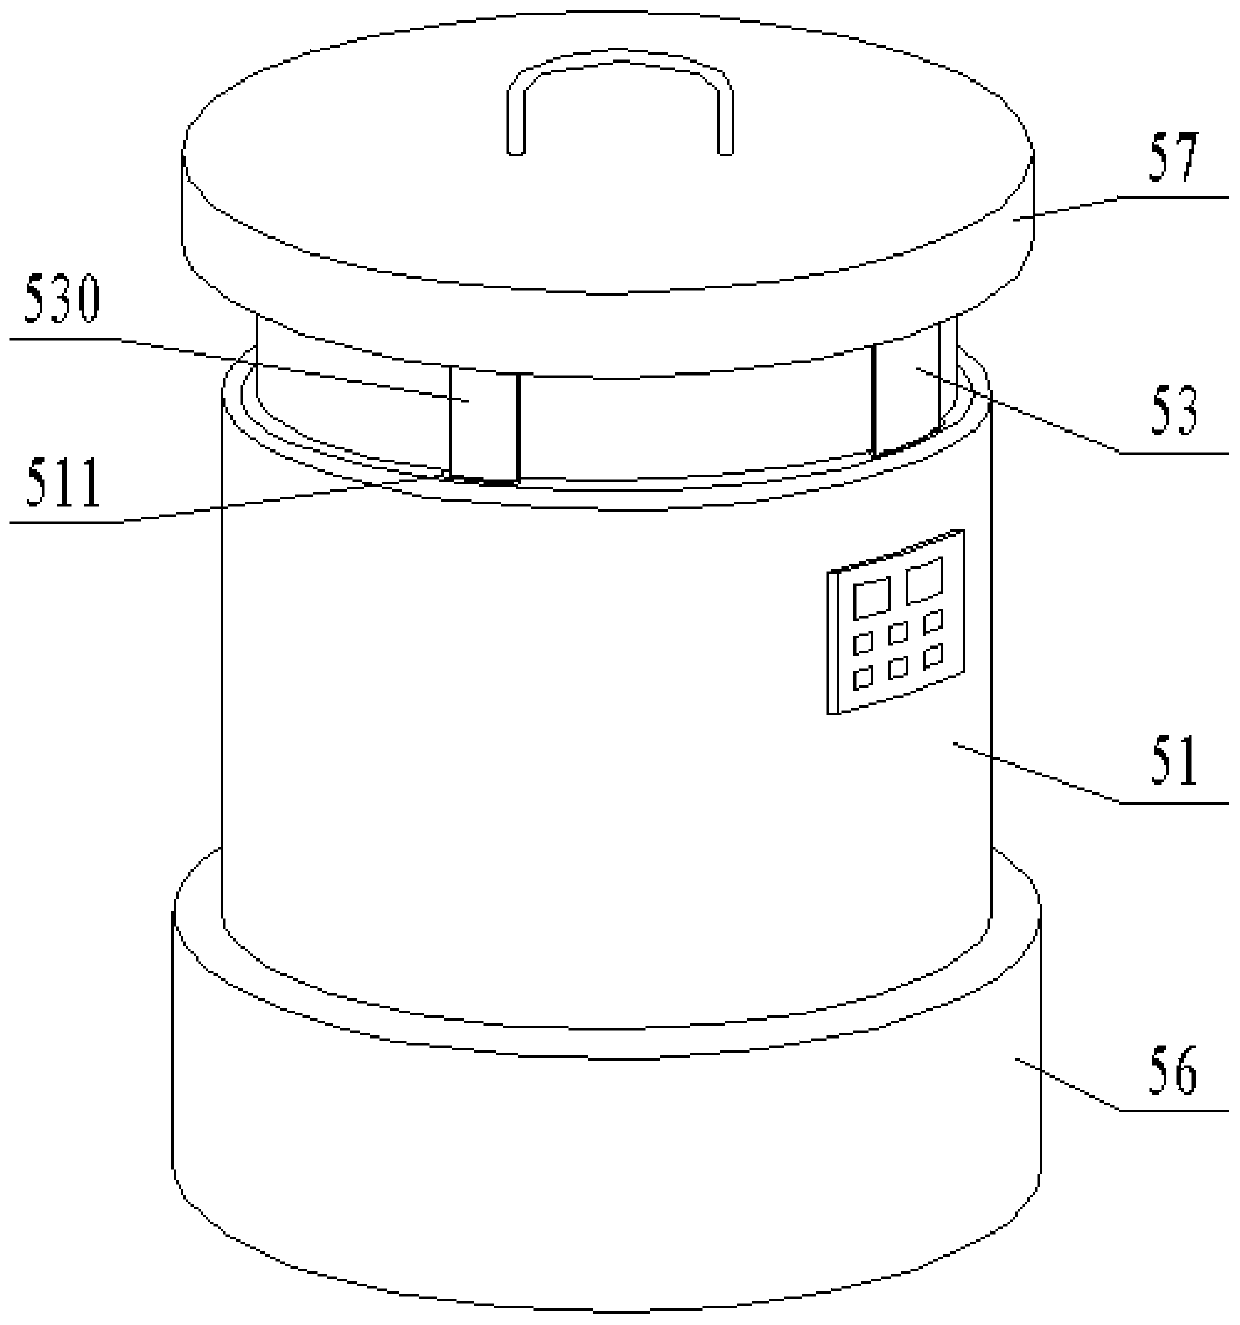 Blood storage device for blood transfusion department